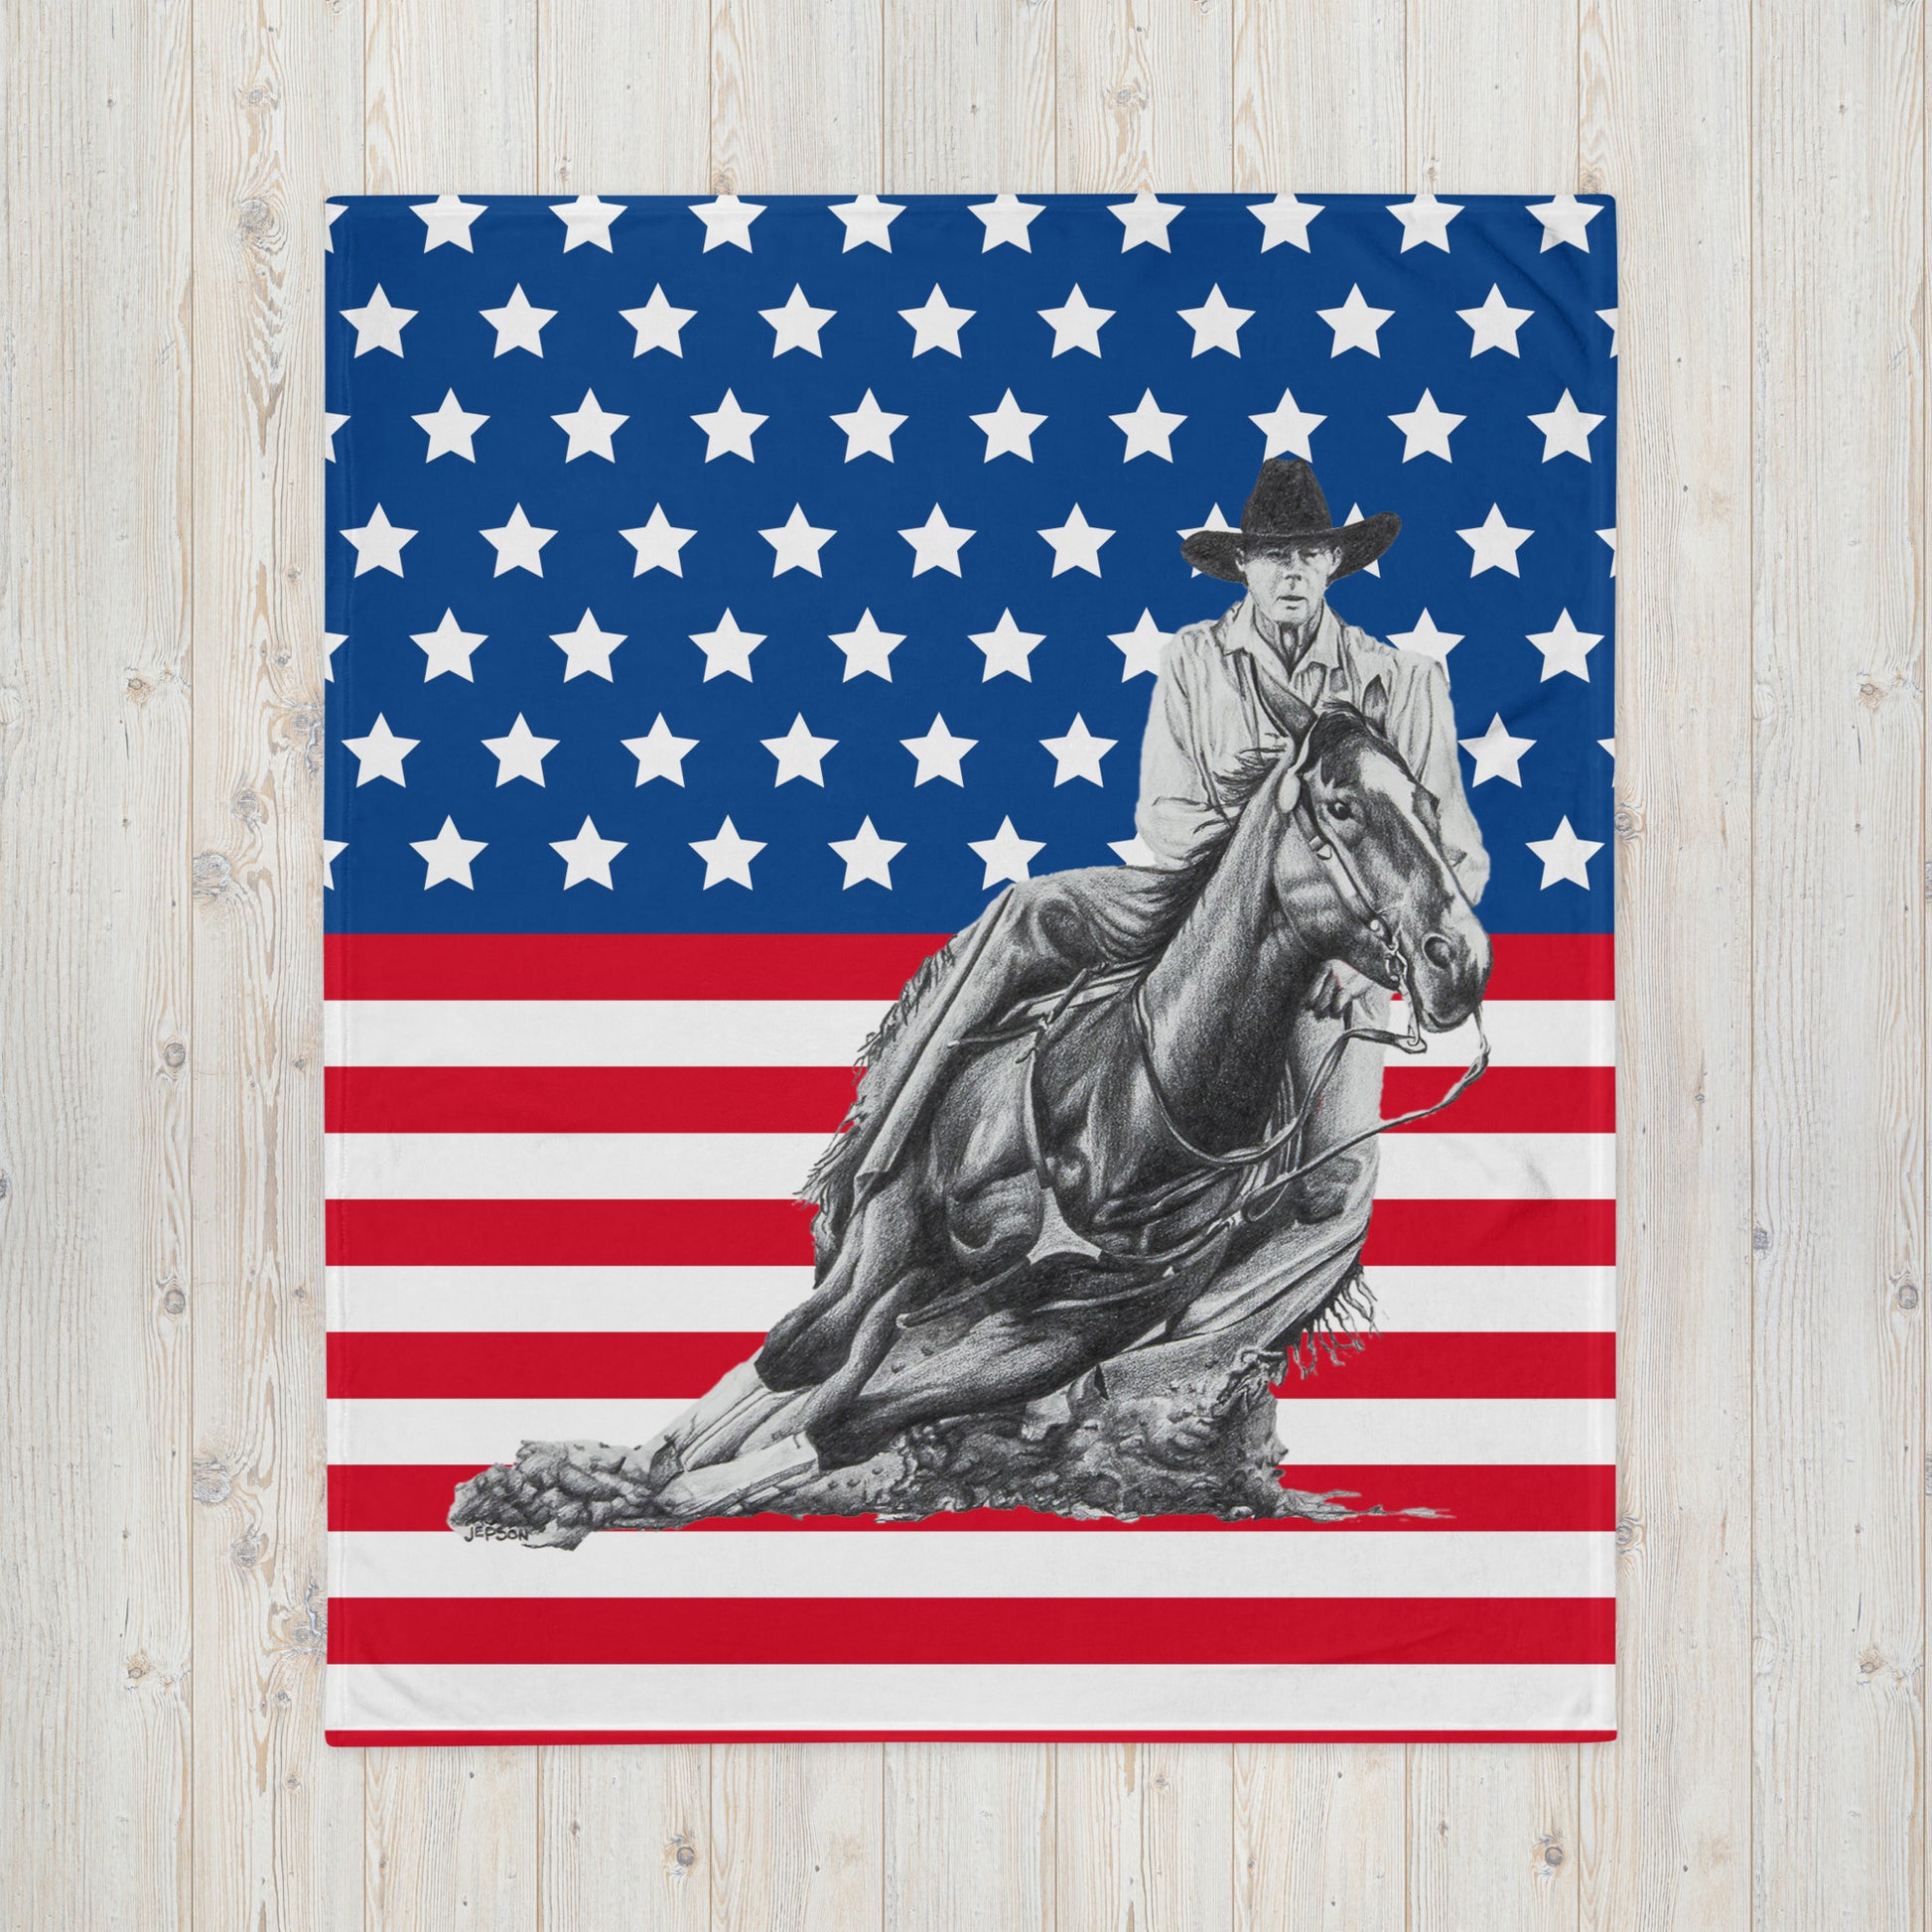 These "Cowboy Throw Blanket" are from a drawing of mine created with a graphite pencil. It is titled "A Cut Above" as it is a cowboy on a cutting horse. It has been digitally optimized and transferred to a poly-cotton blend canvas.